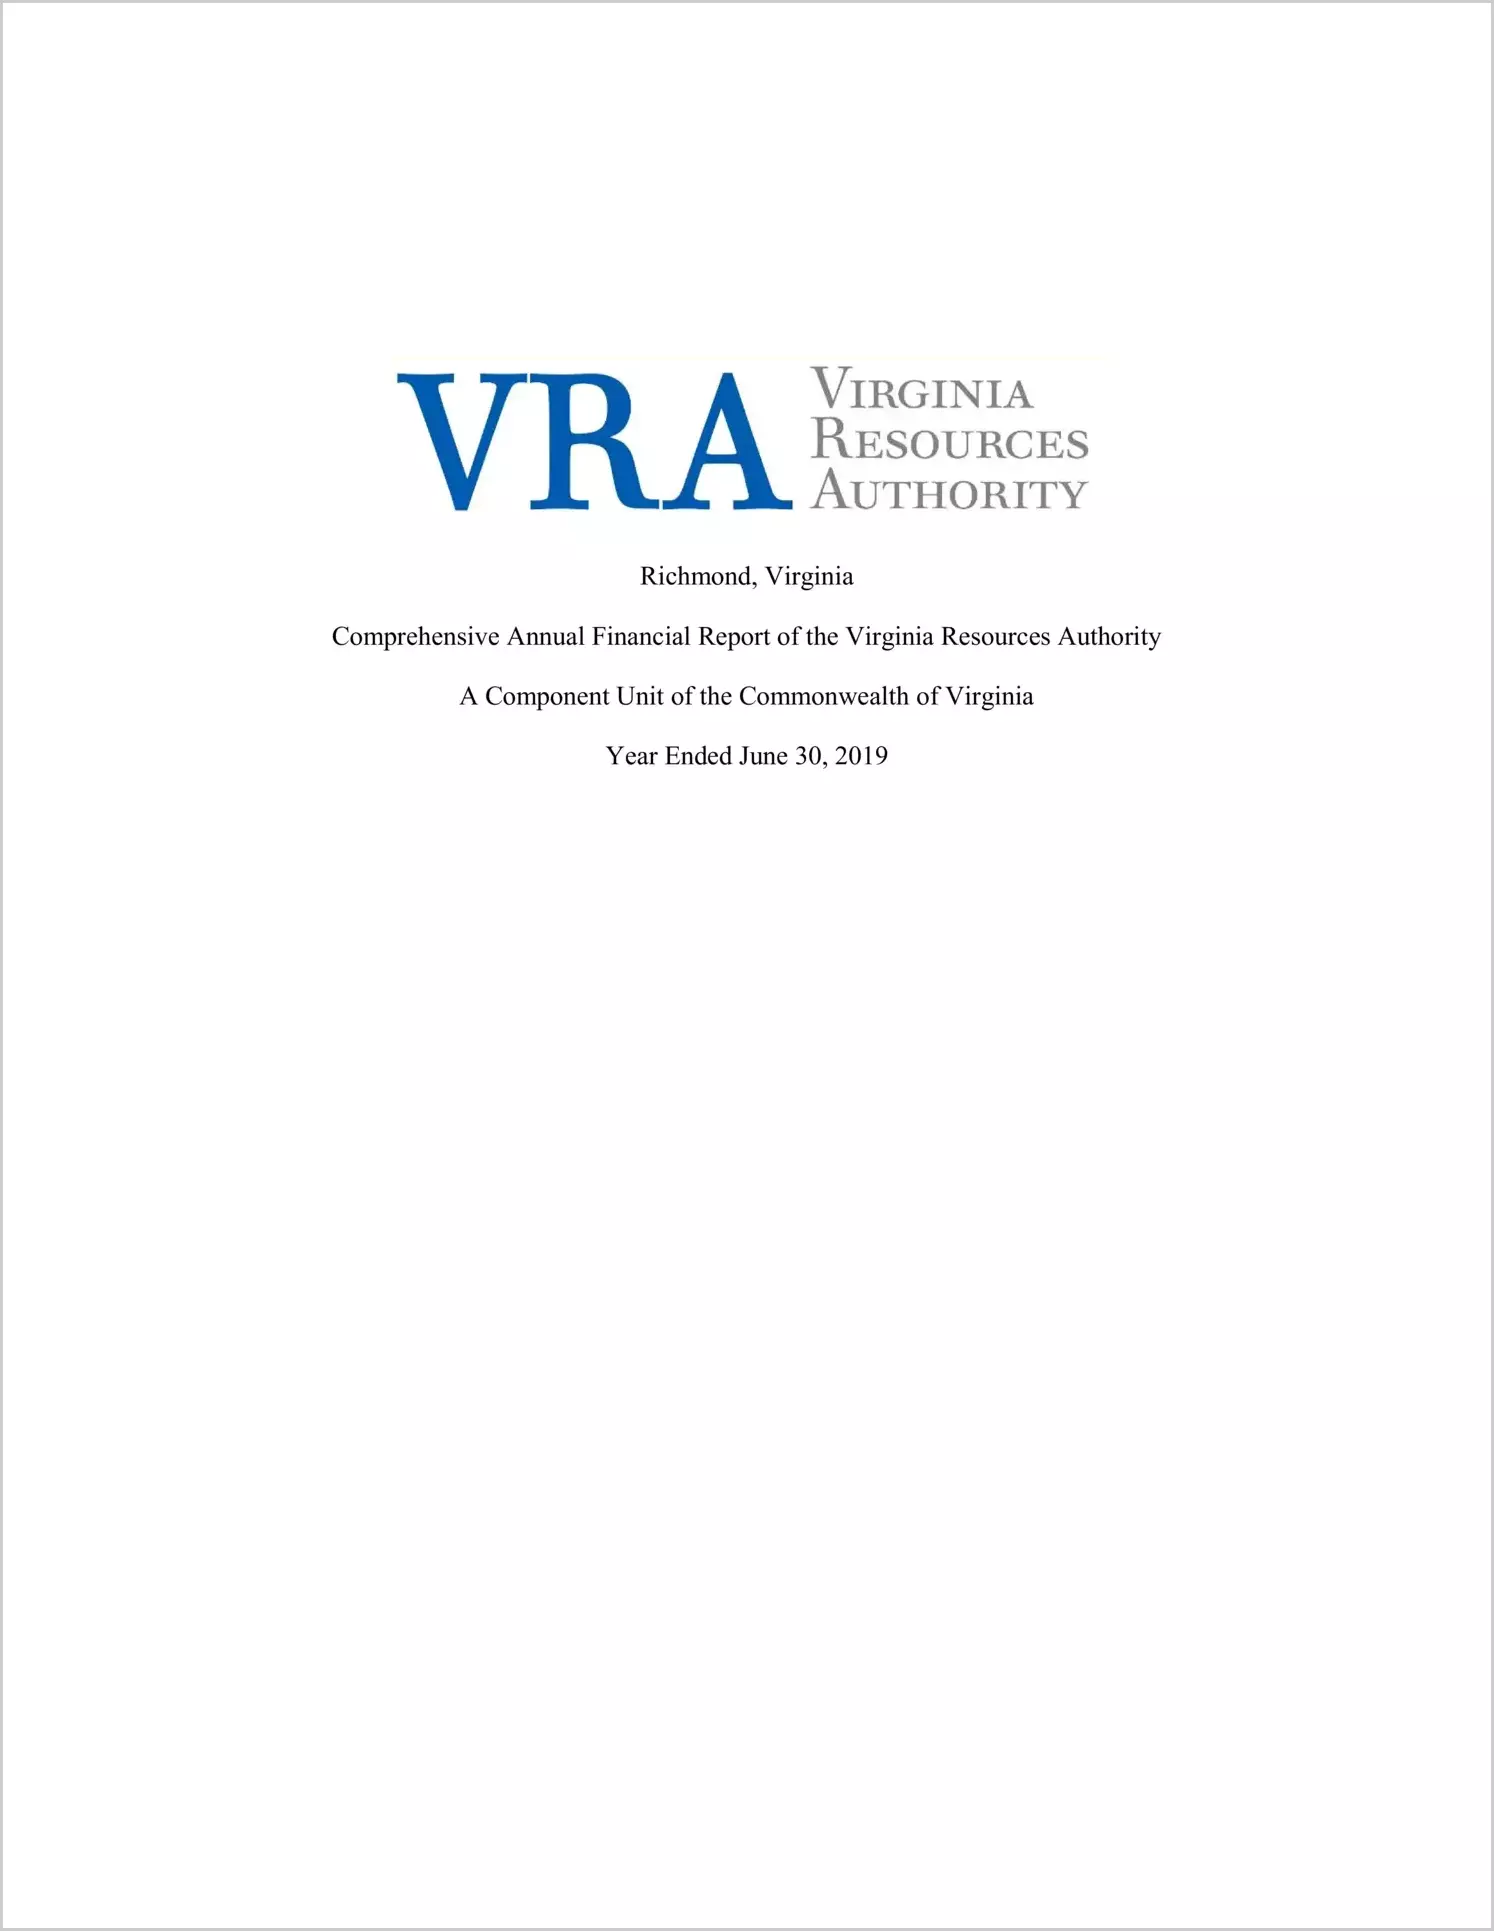 Virginia Resources Authority Financial Statements for the fiscal year ended June 30, 2019